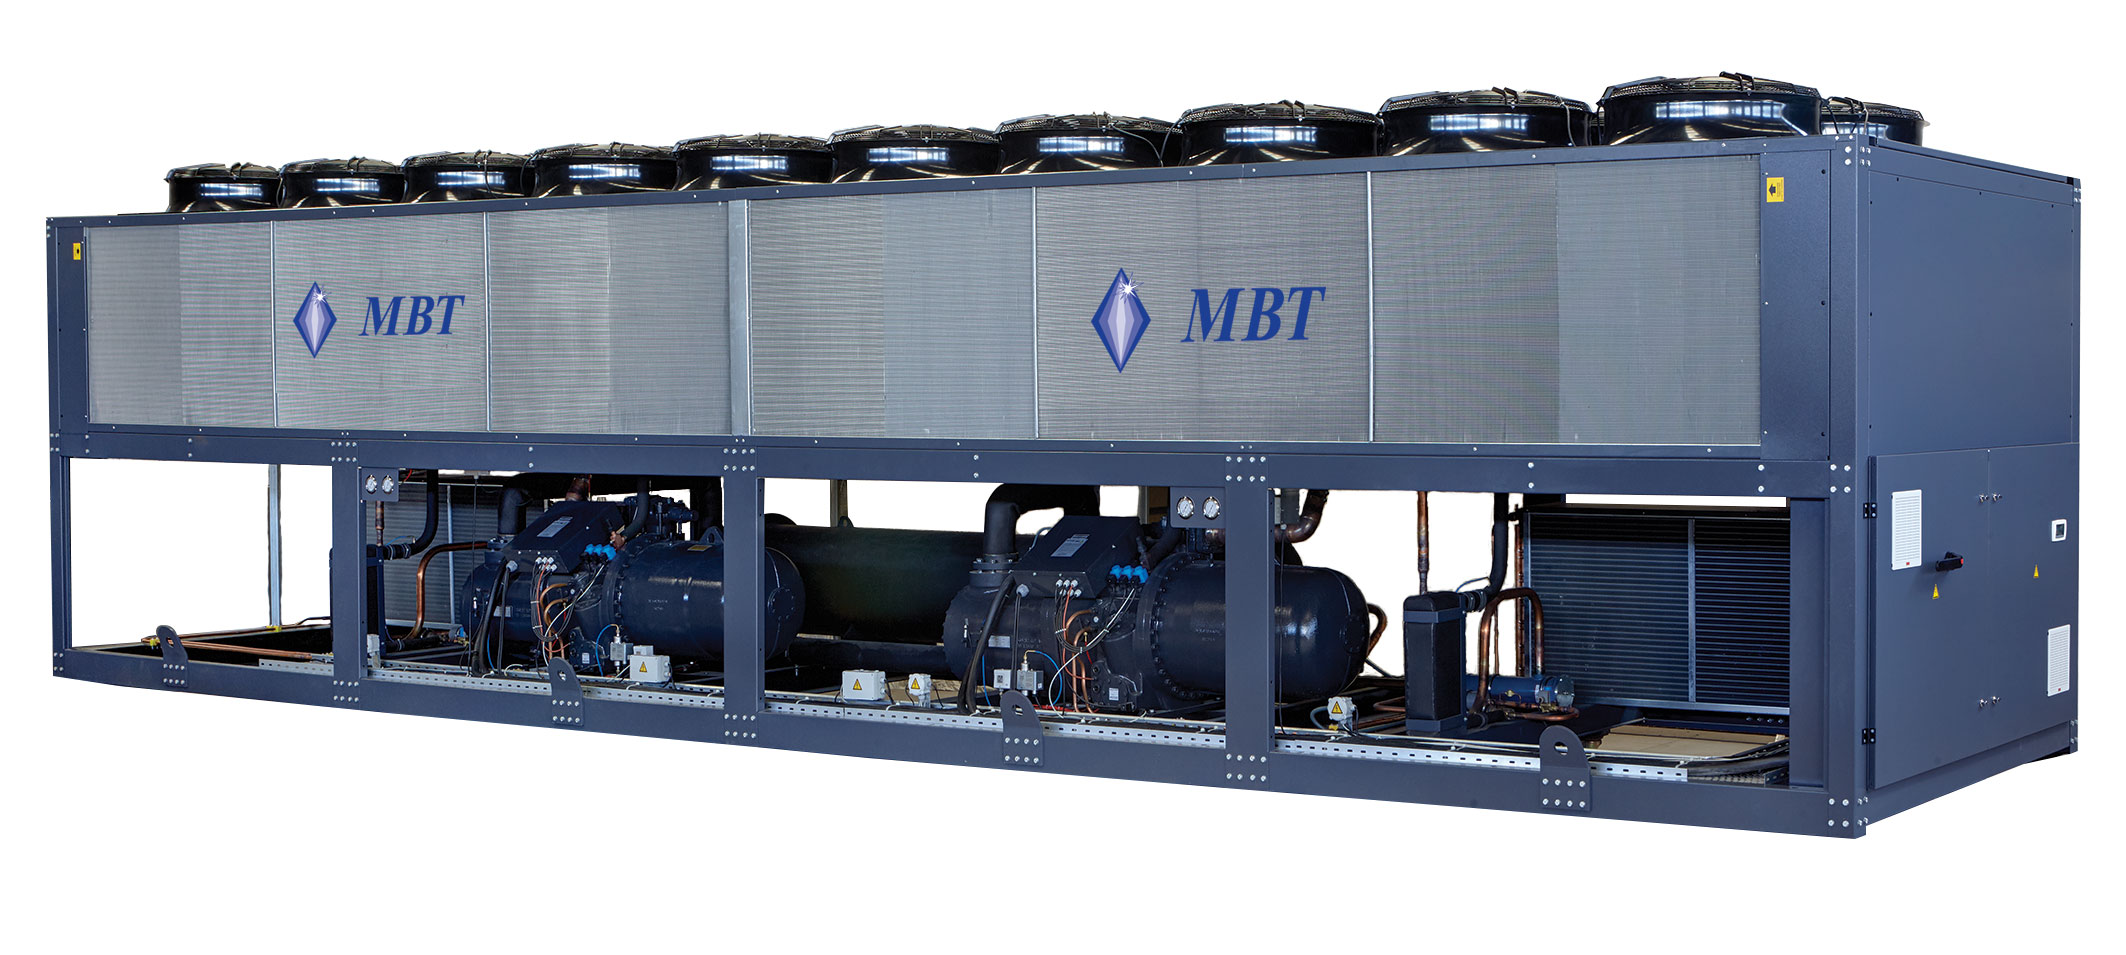 Imbat чиллер. Air cooled Water Chiller. Чиллер nsm4802. Чиллеры wcfx60trs.